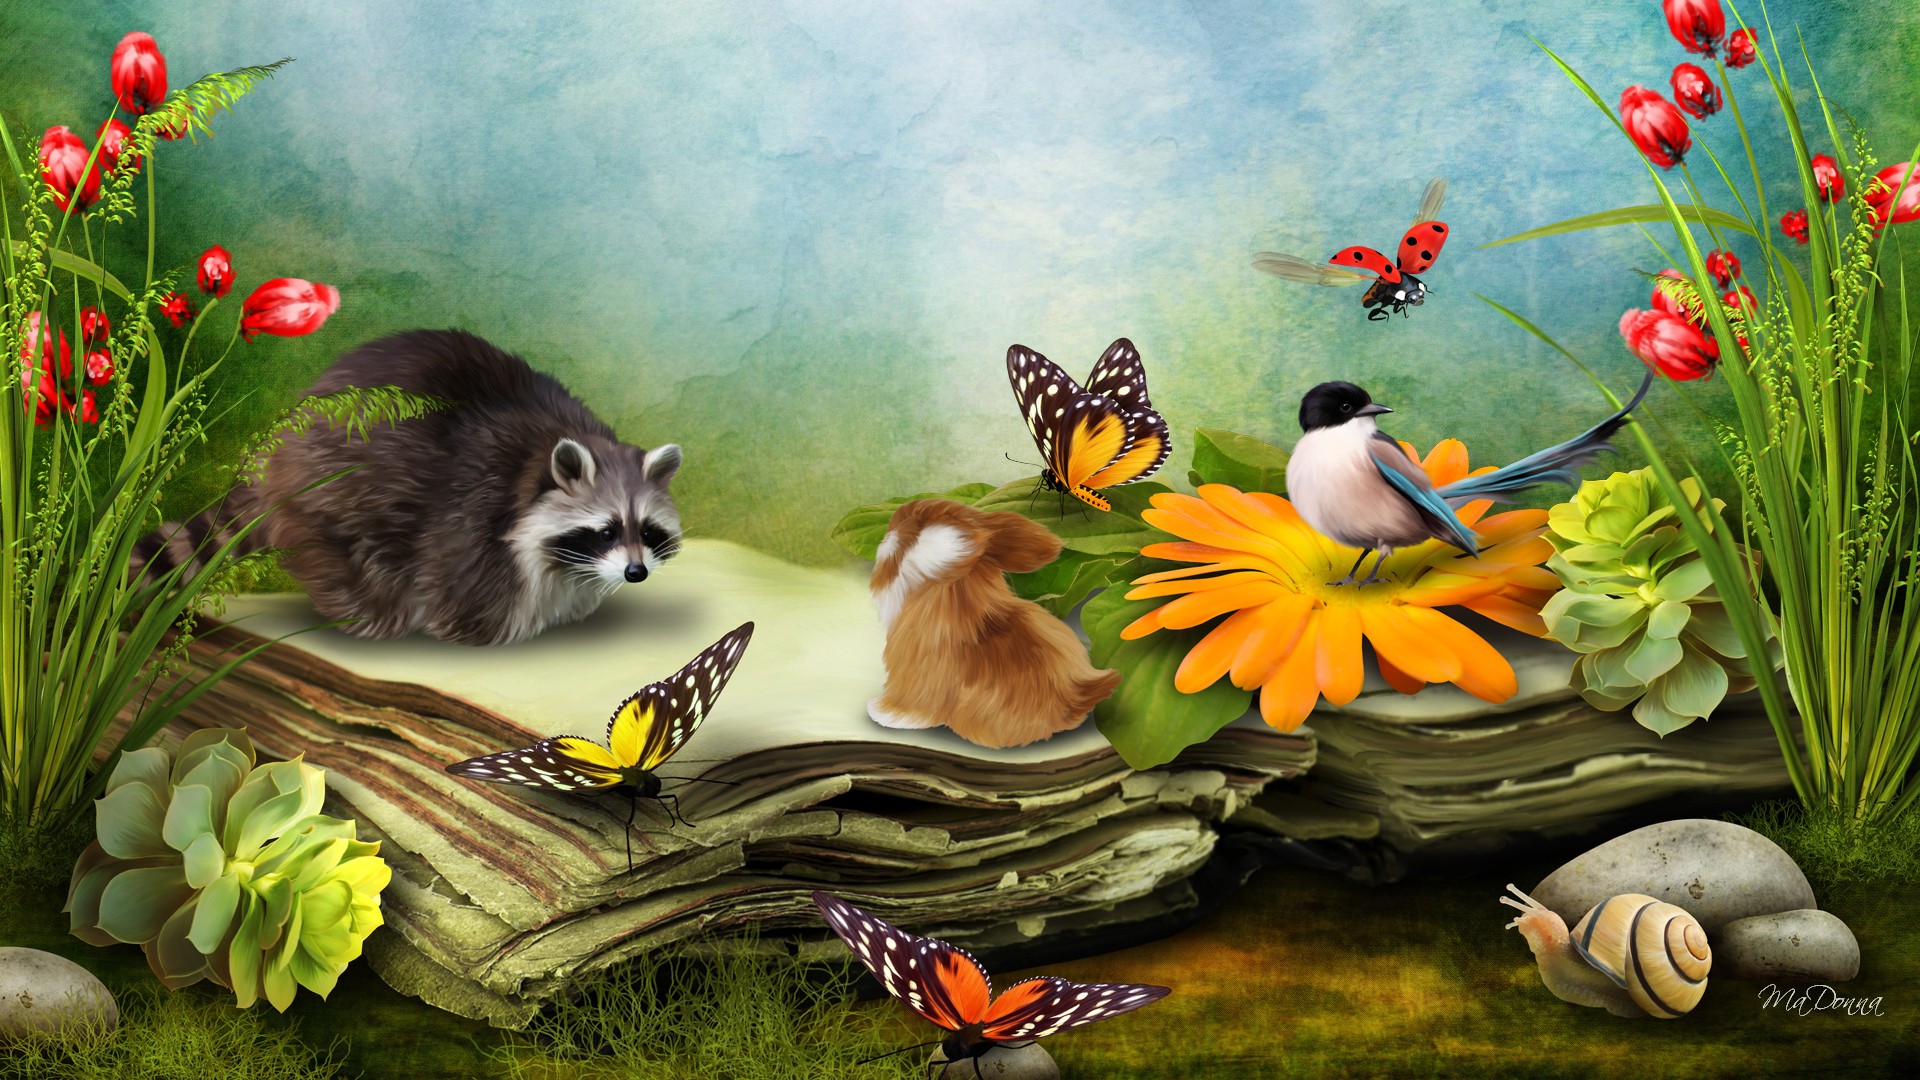 whimsical wallpaper,painting,spring,organism,wildlife,plant